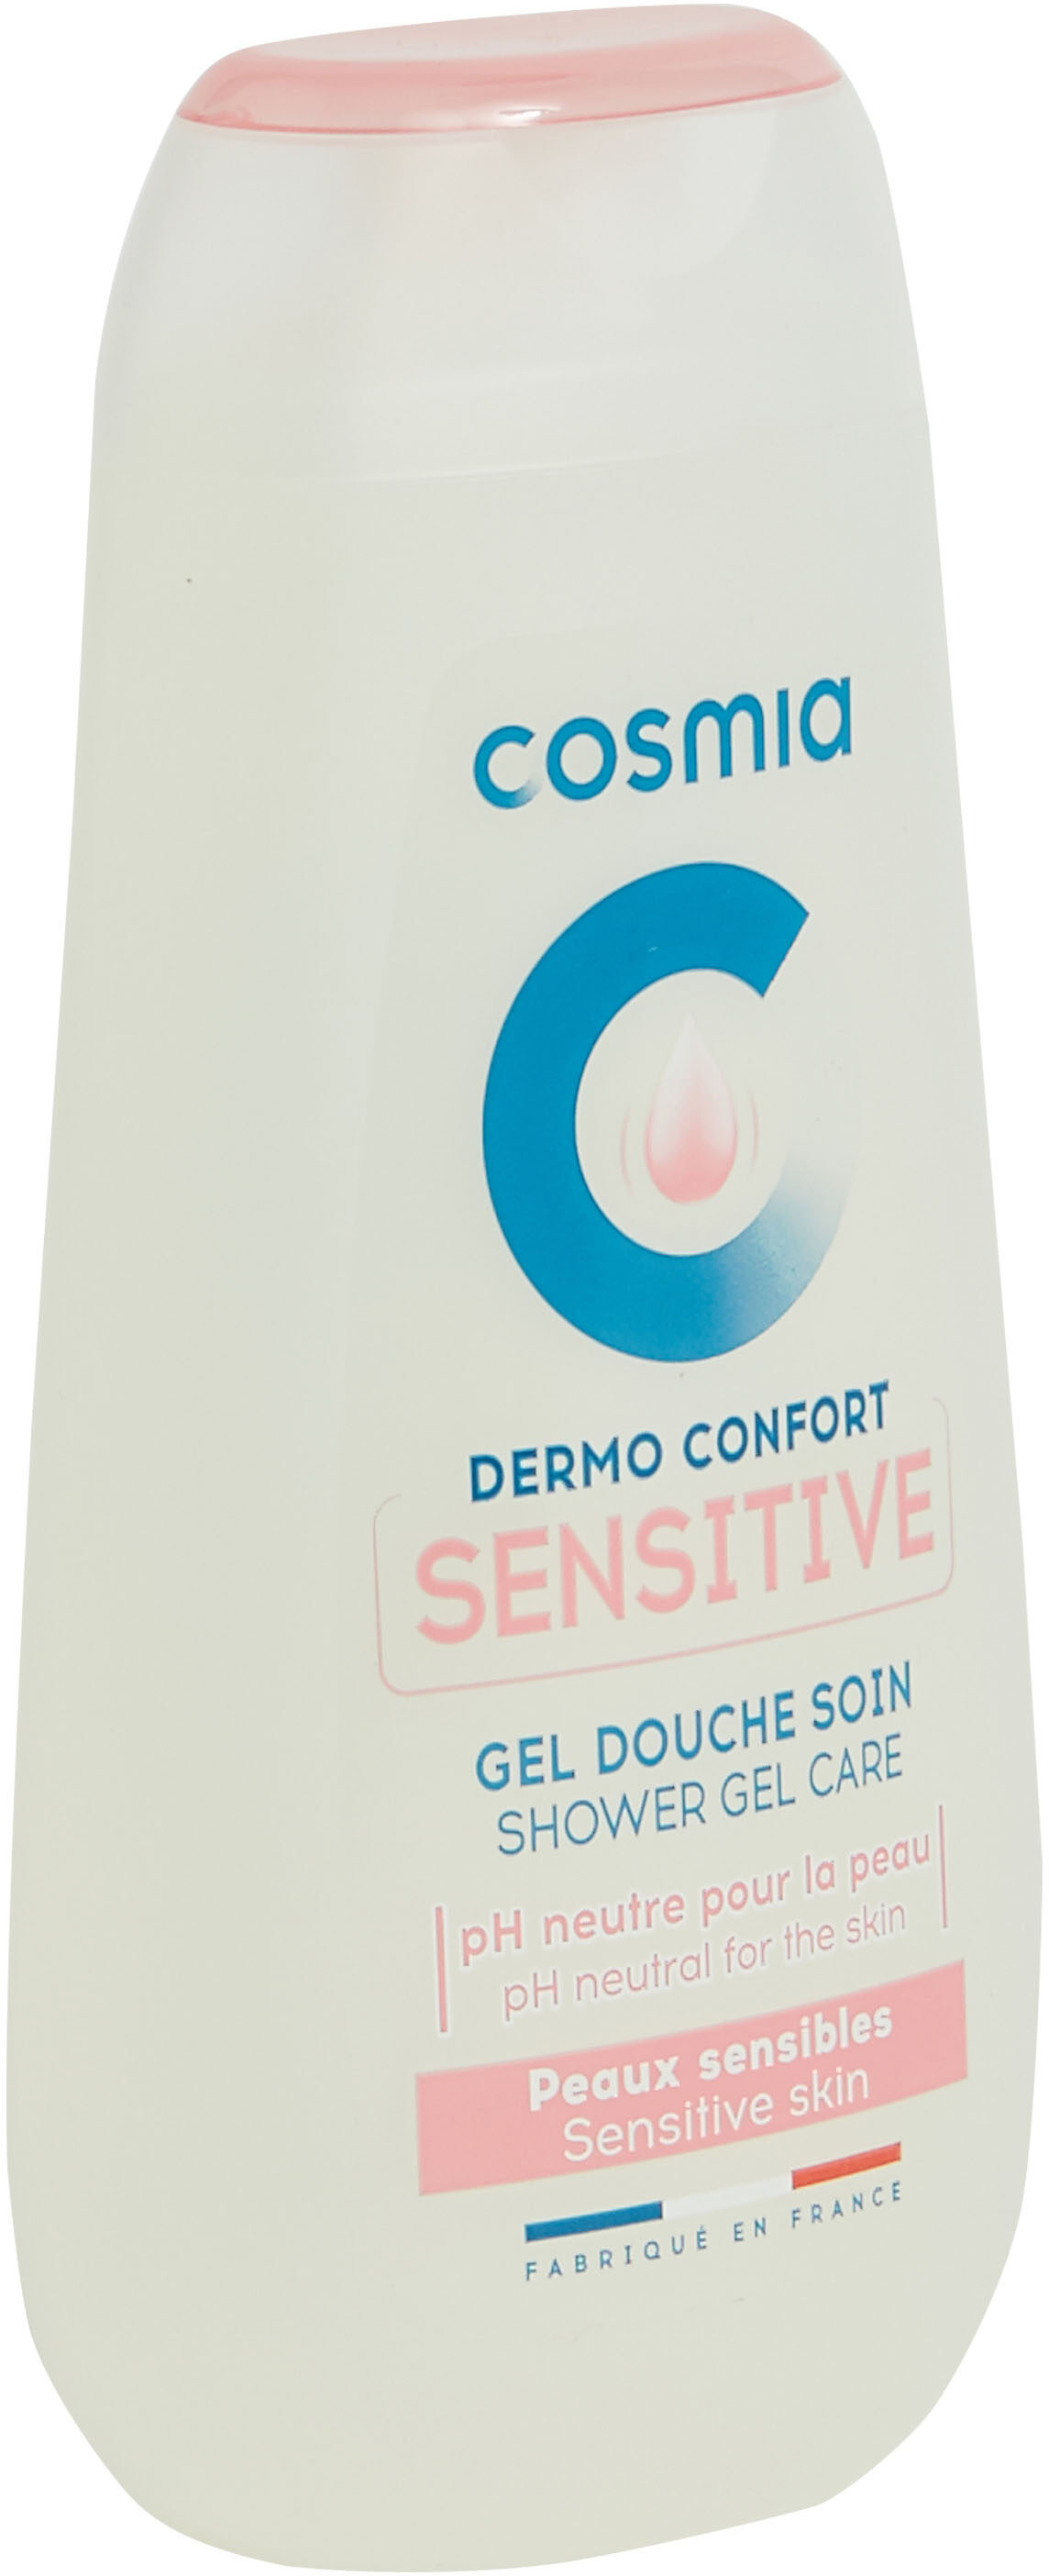 Gel douche soin - Product - fr